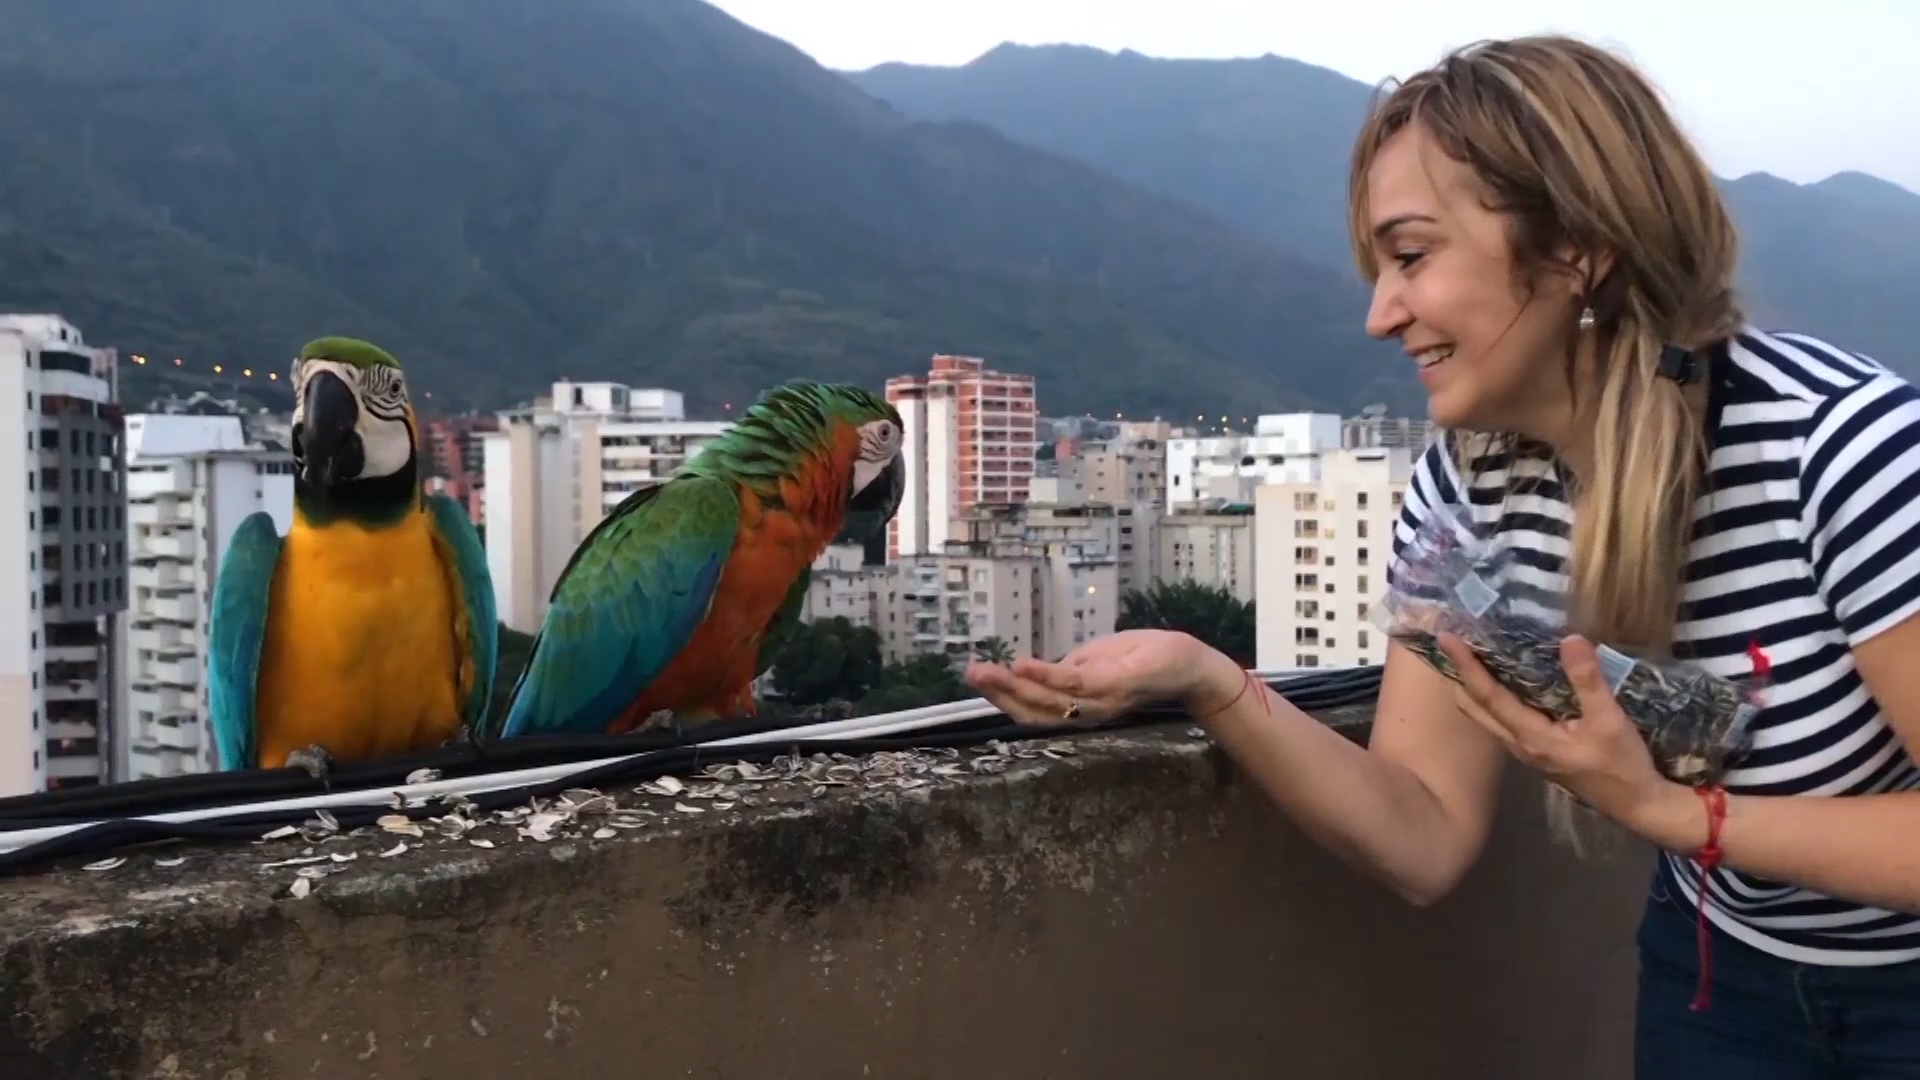 The “Protector of Macaws” has spent 40 years freeing macaws from captivity in Caracas